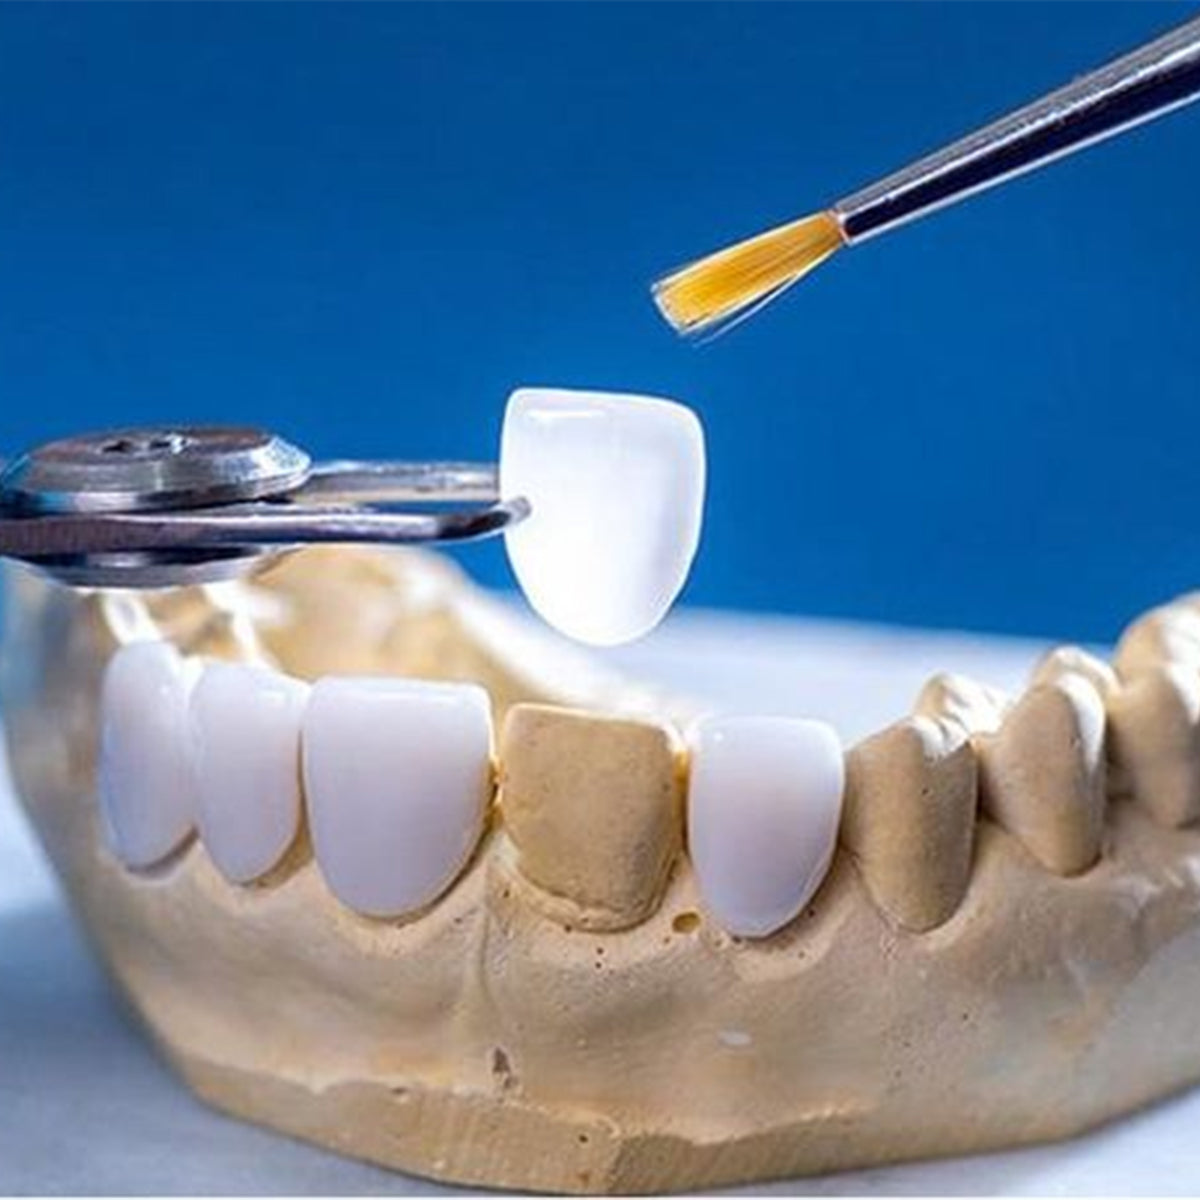 Clinical application of lithium disilicate cast porcelain dental veneers in the restoration of heavily worn teeth